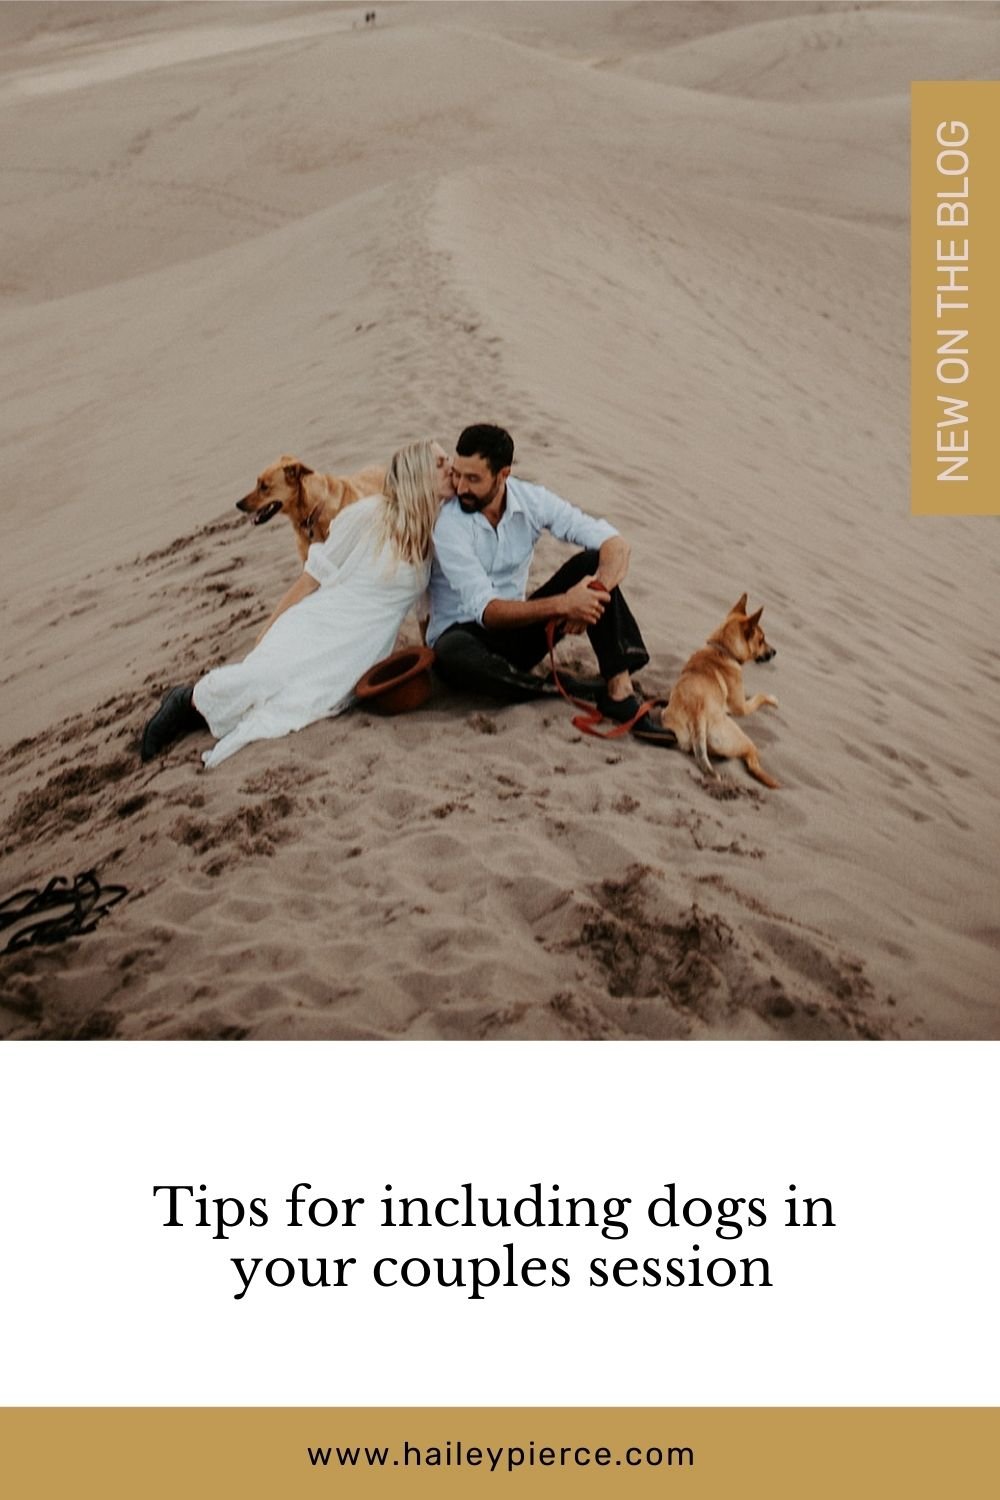 tips-for-couples-sessions-with-dogs-1.jpg